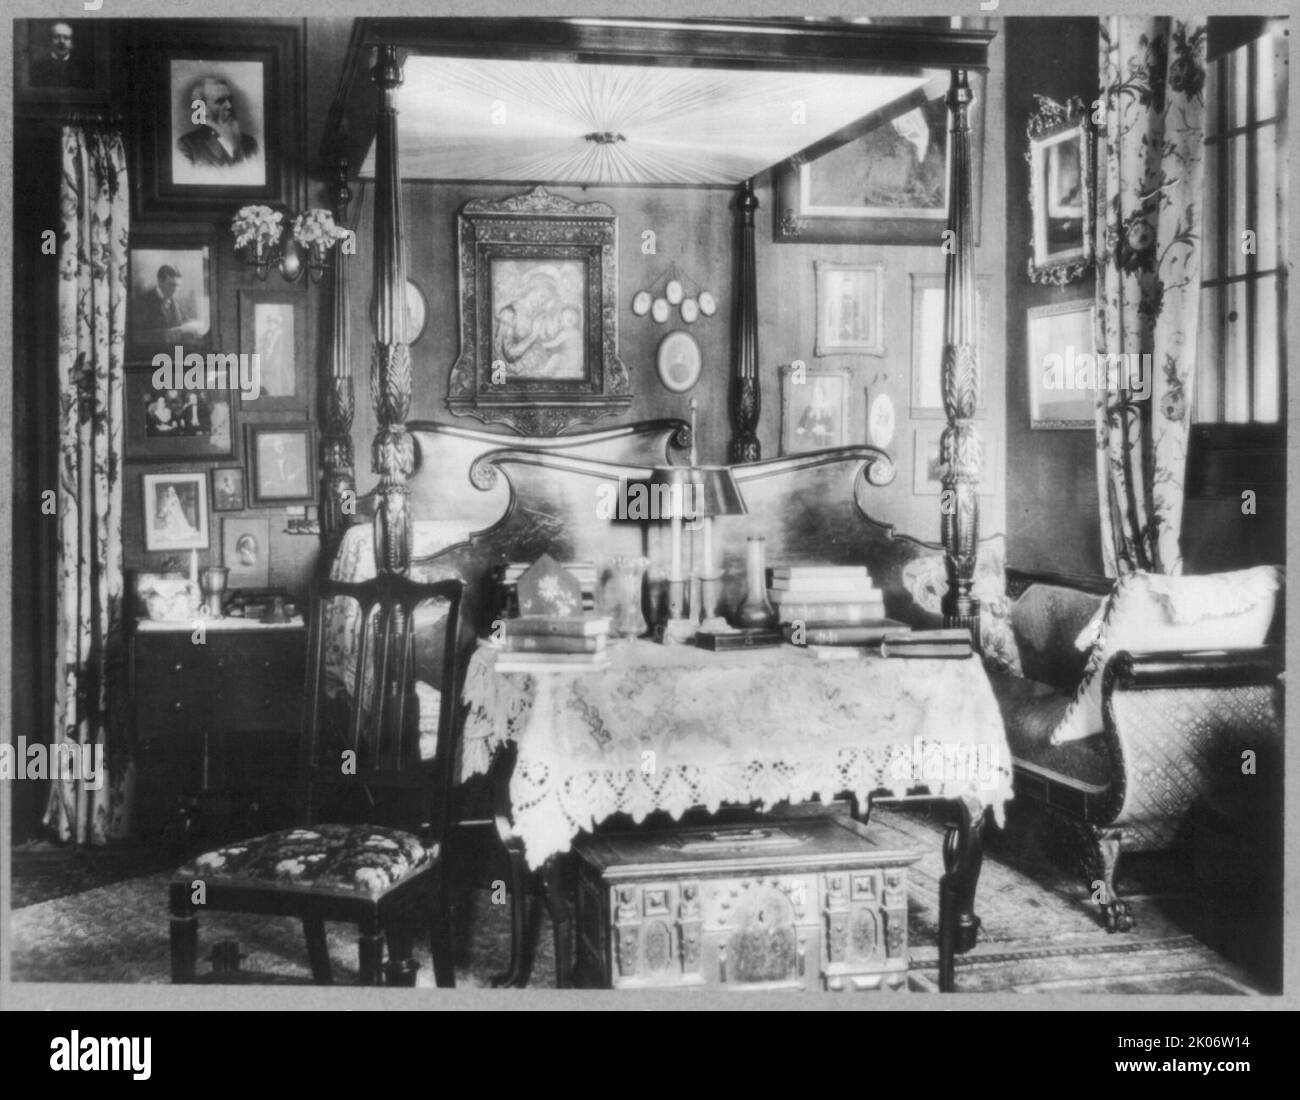 Mrs. Phoebe Apperson Hearst's home, Pleasanton, Cal.: interior; detail of bedroom, 1920s. Stock Photo